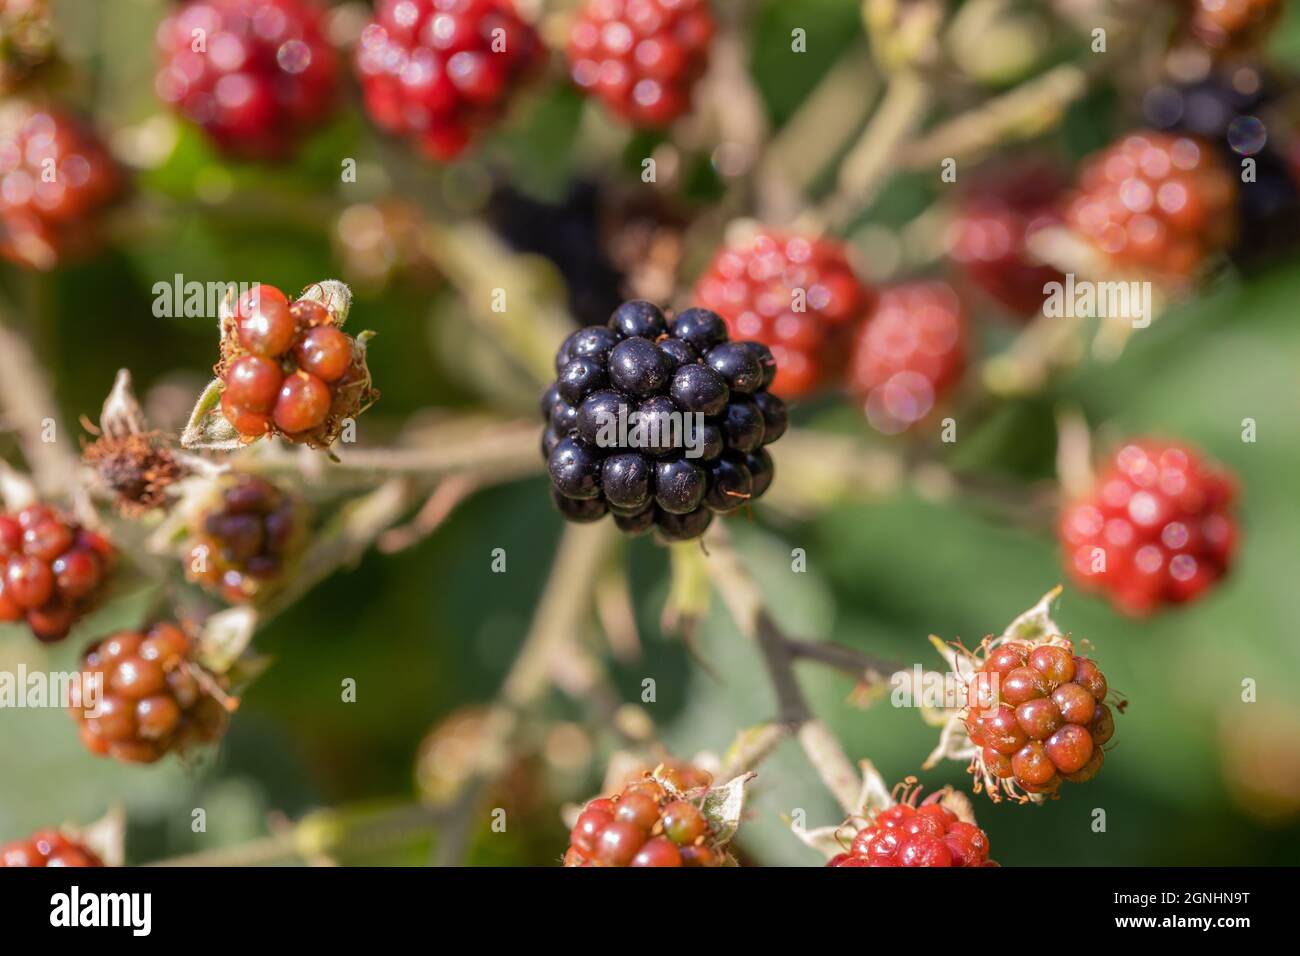 Blackberry, Blackberries, ripened, ripening ( Rubus fruticosus ). Bramble fruits in different stages of ripening. Colour attracts attention of birds. Stock Photo